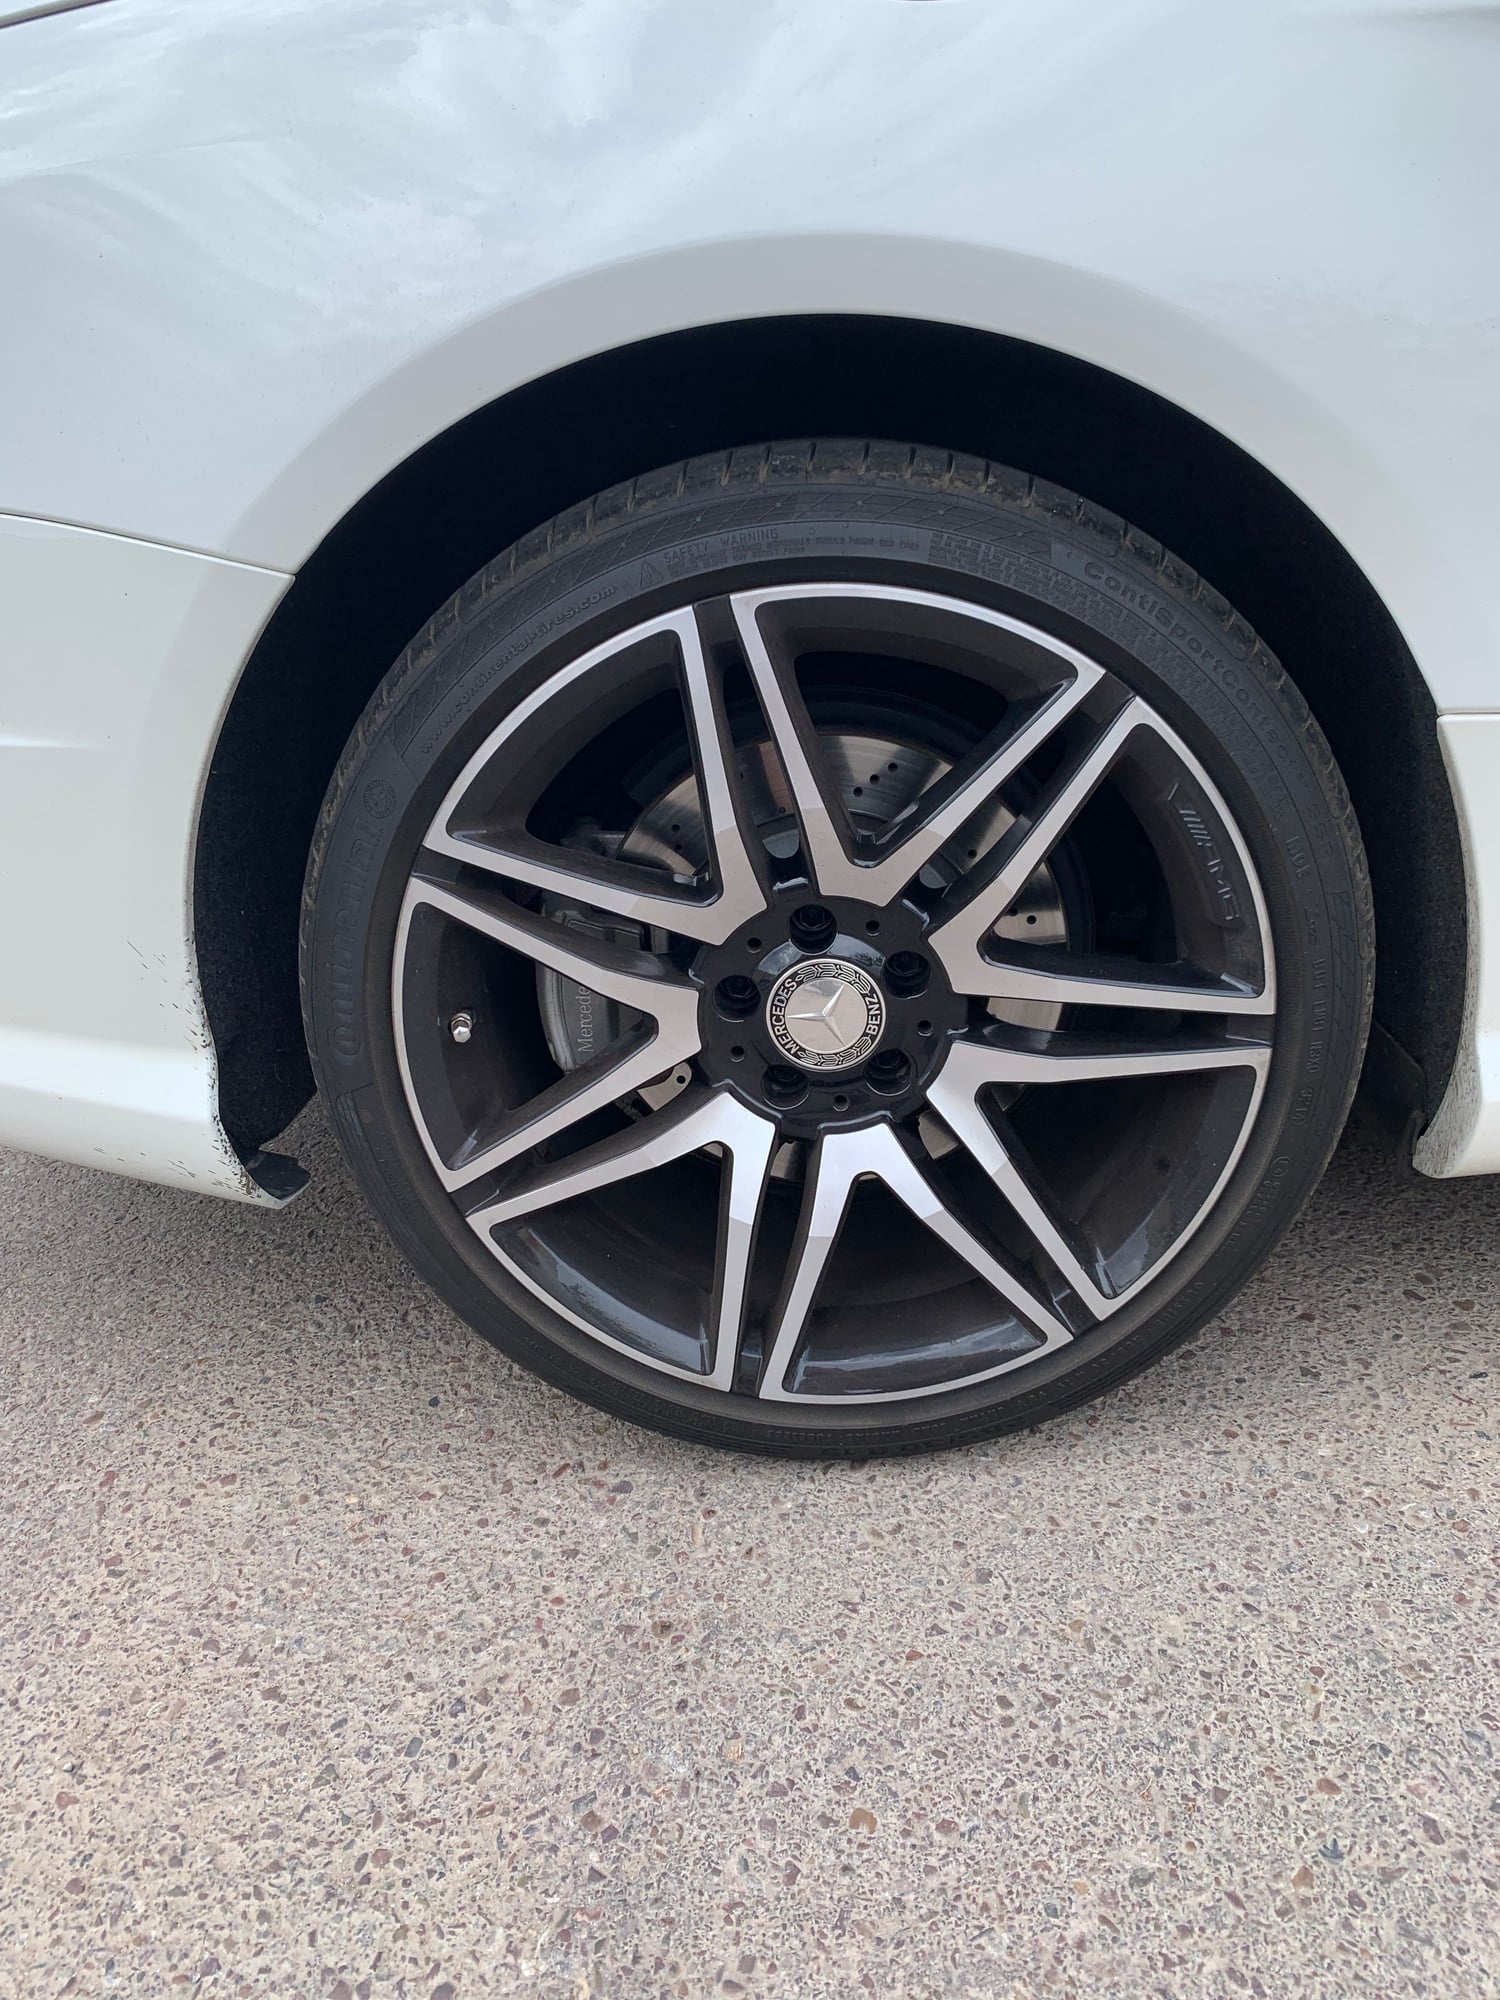 Wheels and Tires/Axles - 2015 SL 550 WHITE ARROW WHEELS 6K MILES - Used - 2015 Mercedes-Benz SL550 - Great Falls, MT 59401, United States